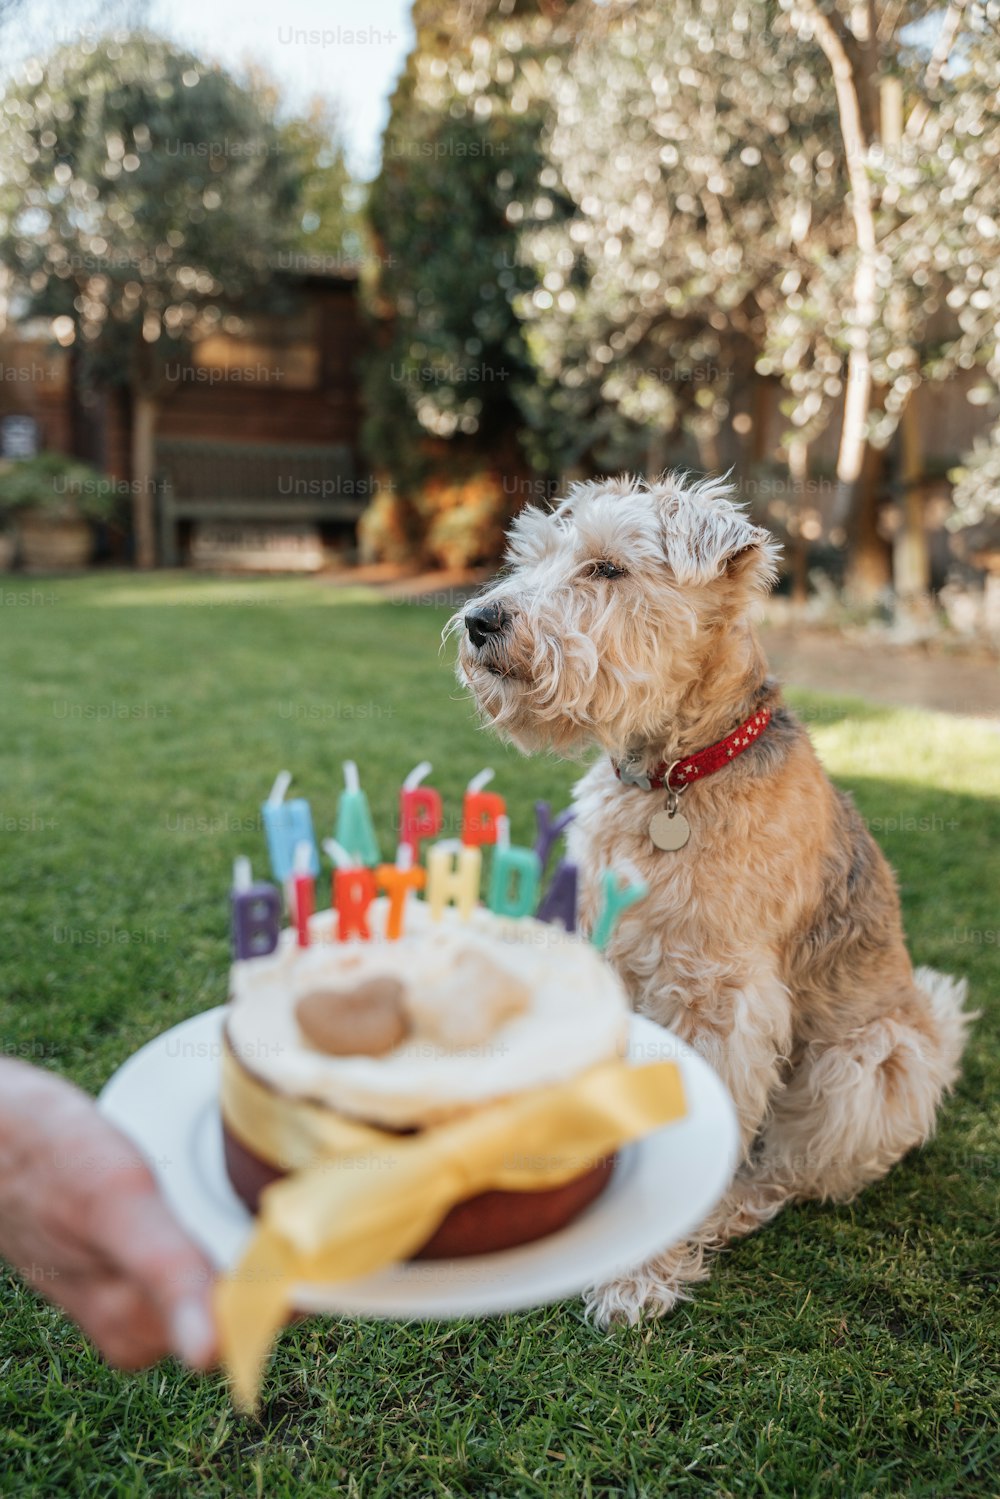 a dog sitting in the grass with a birthday cake